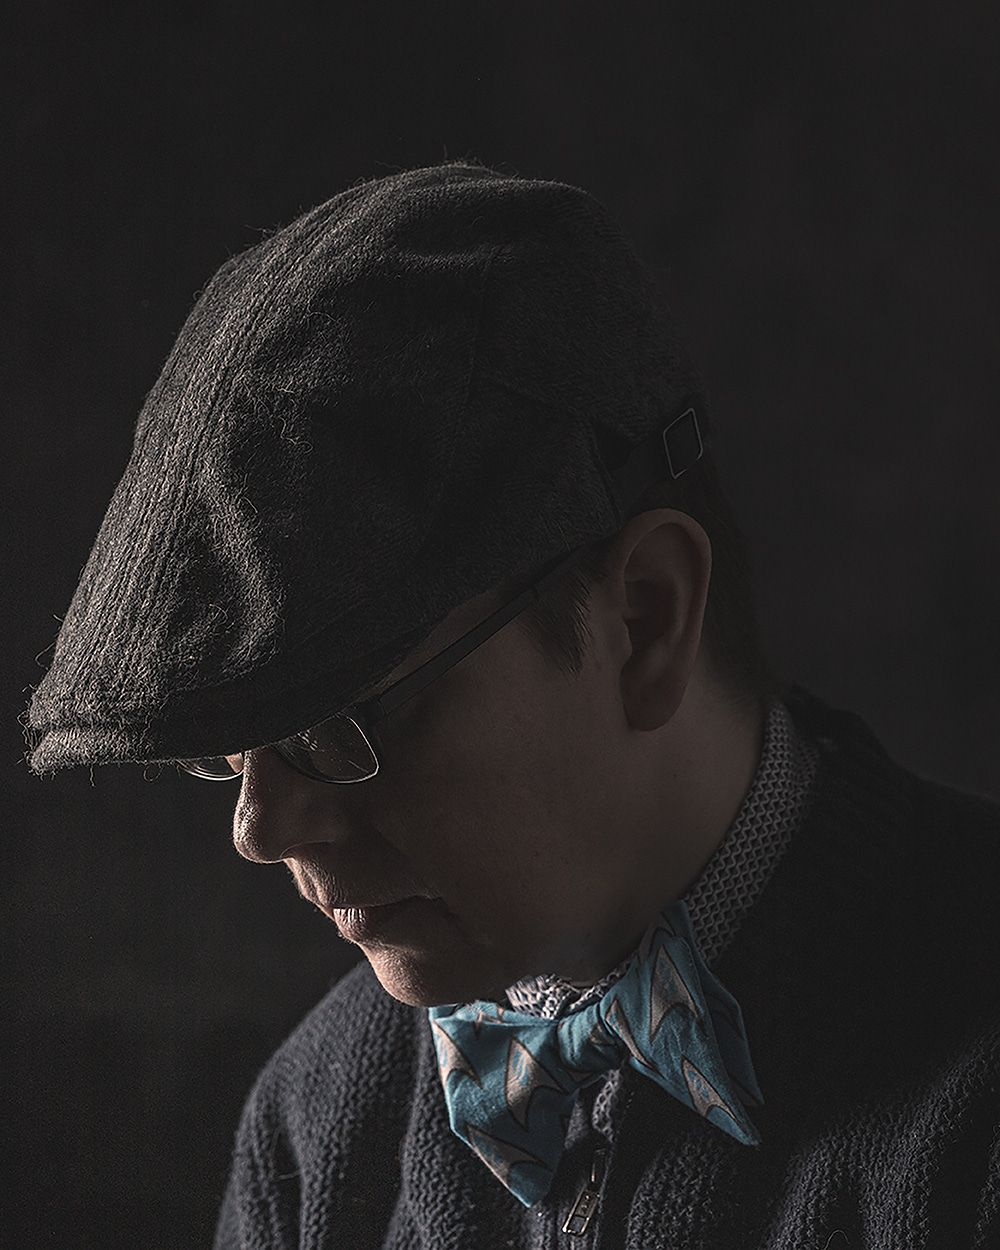 Shoulder-up portrait shot, Jules is a white person with brown hair, wearing thin black glasses, a black newsboy cap, blue and grey Star Trek bowtie, grey patterned collared shirt, and knitted navy-blue zip up cardigan. He is looking down without smiling. Photo credit: Jules Sherred.